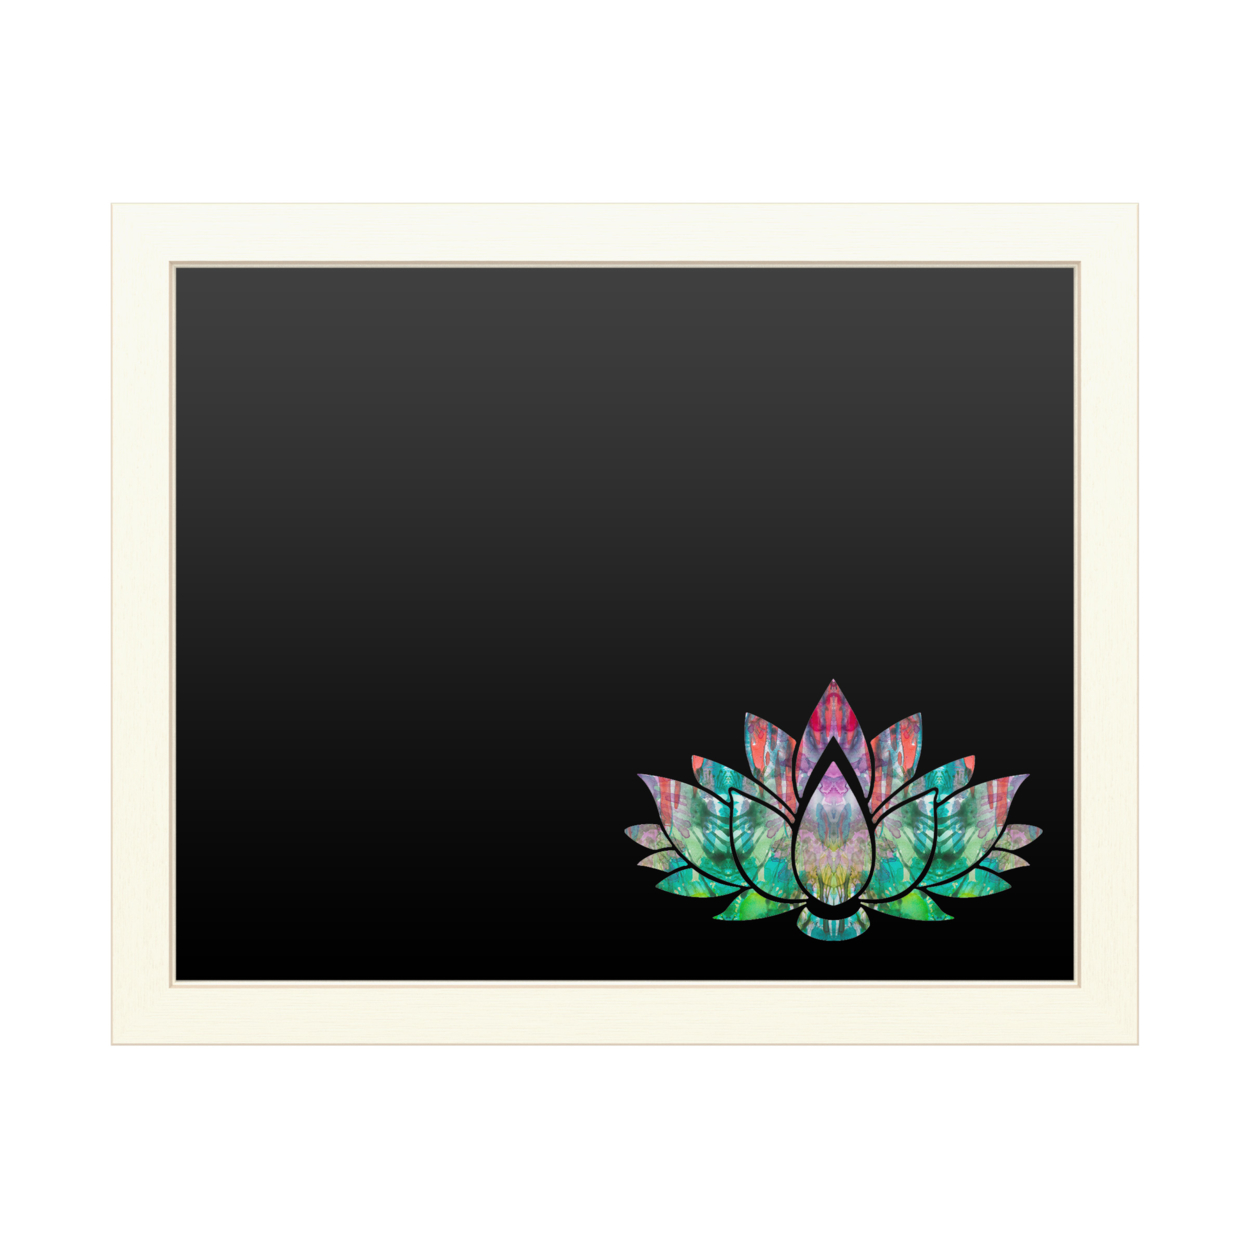 16 X 20 Chalk Board With Printed Artwork - Dean Russo Lotus Flower White Board - Ready To Hang Chalkboard